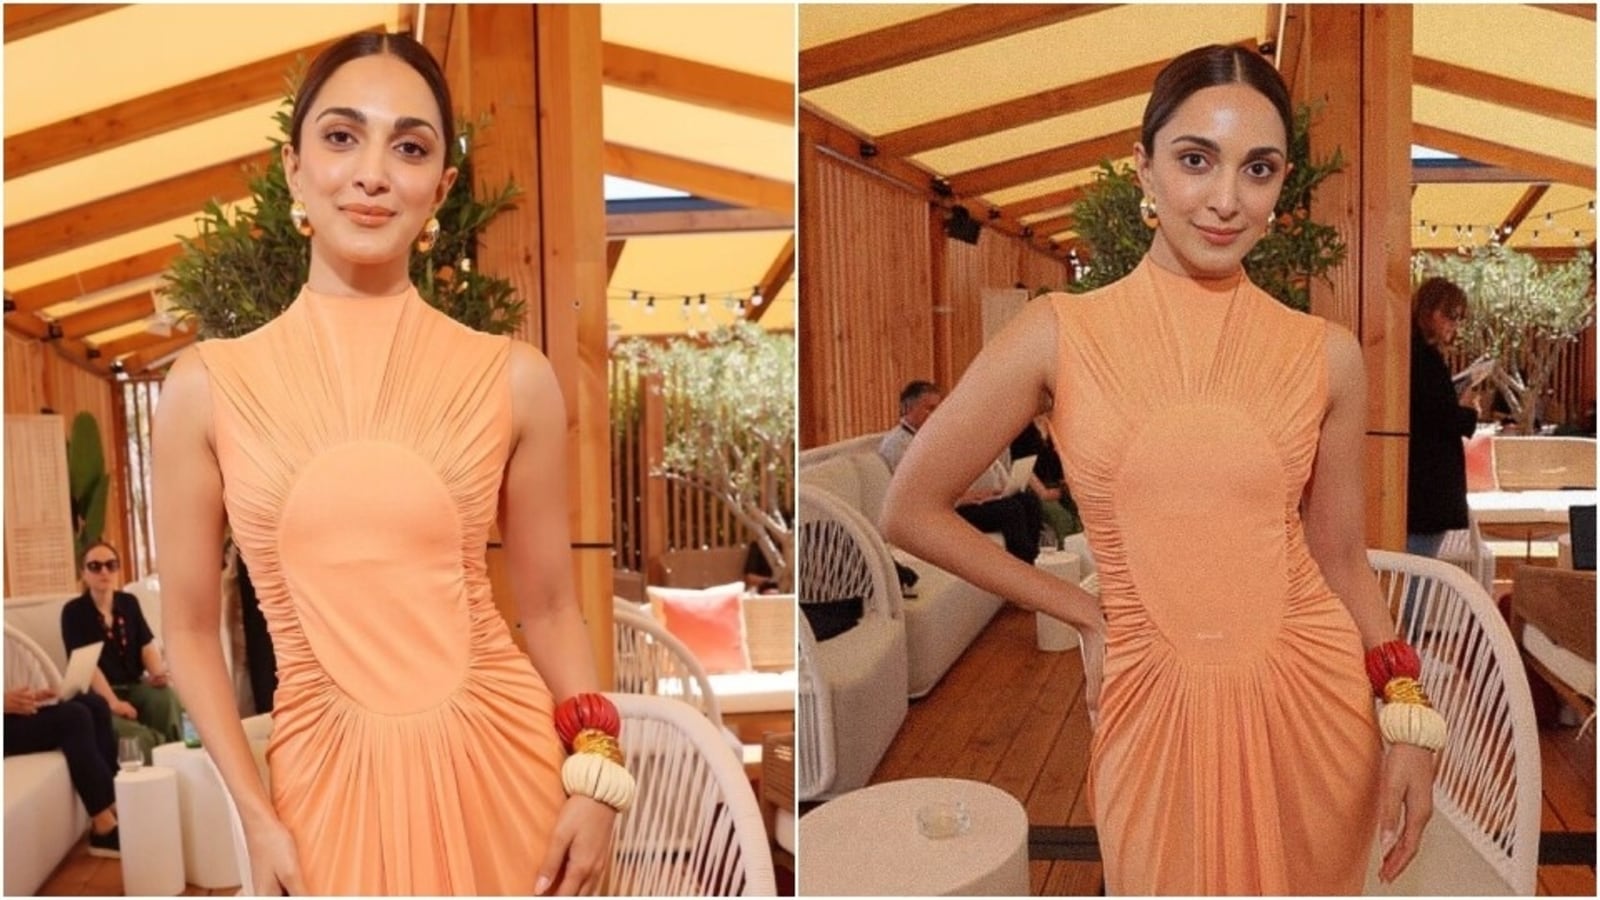 Kiara Advani wears orange ruched dress for her second look at Cannes Film Festival; fans say ‘Still better than most’